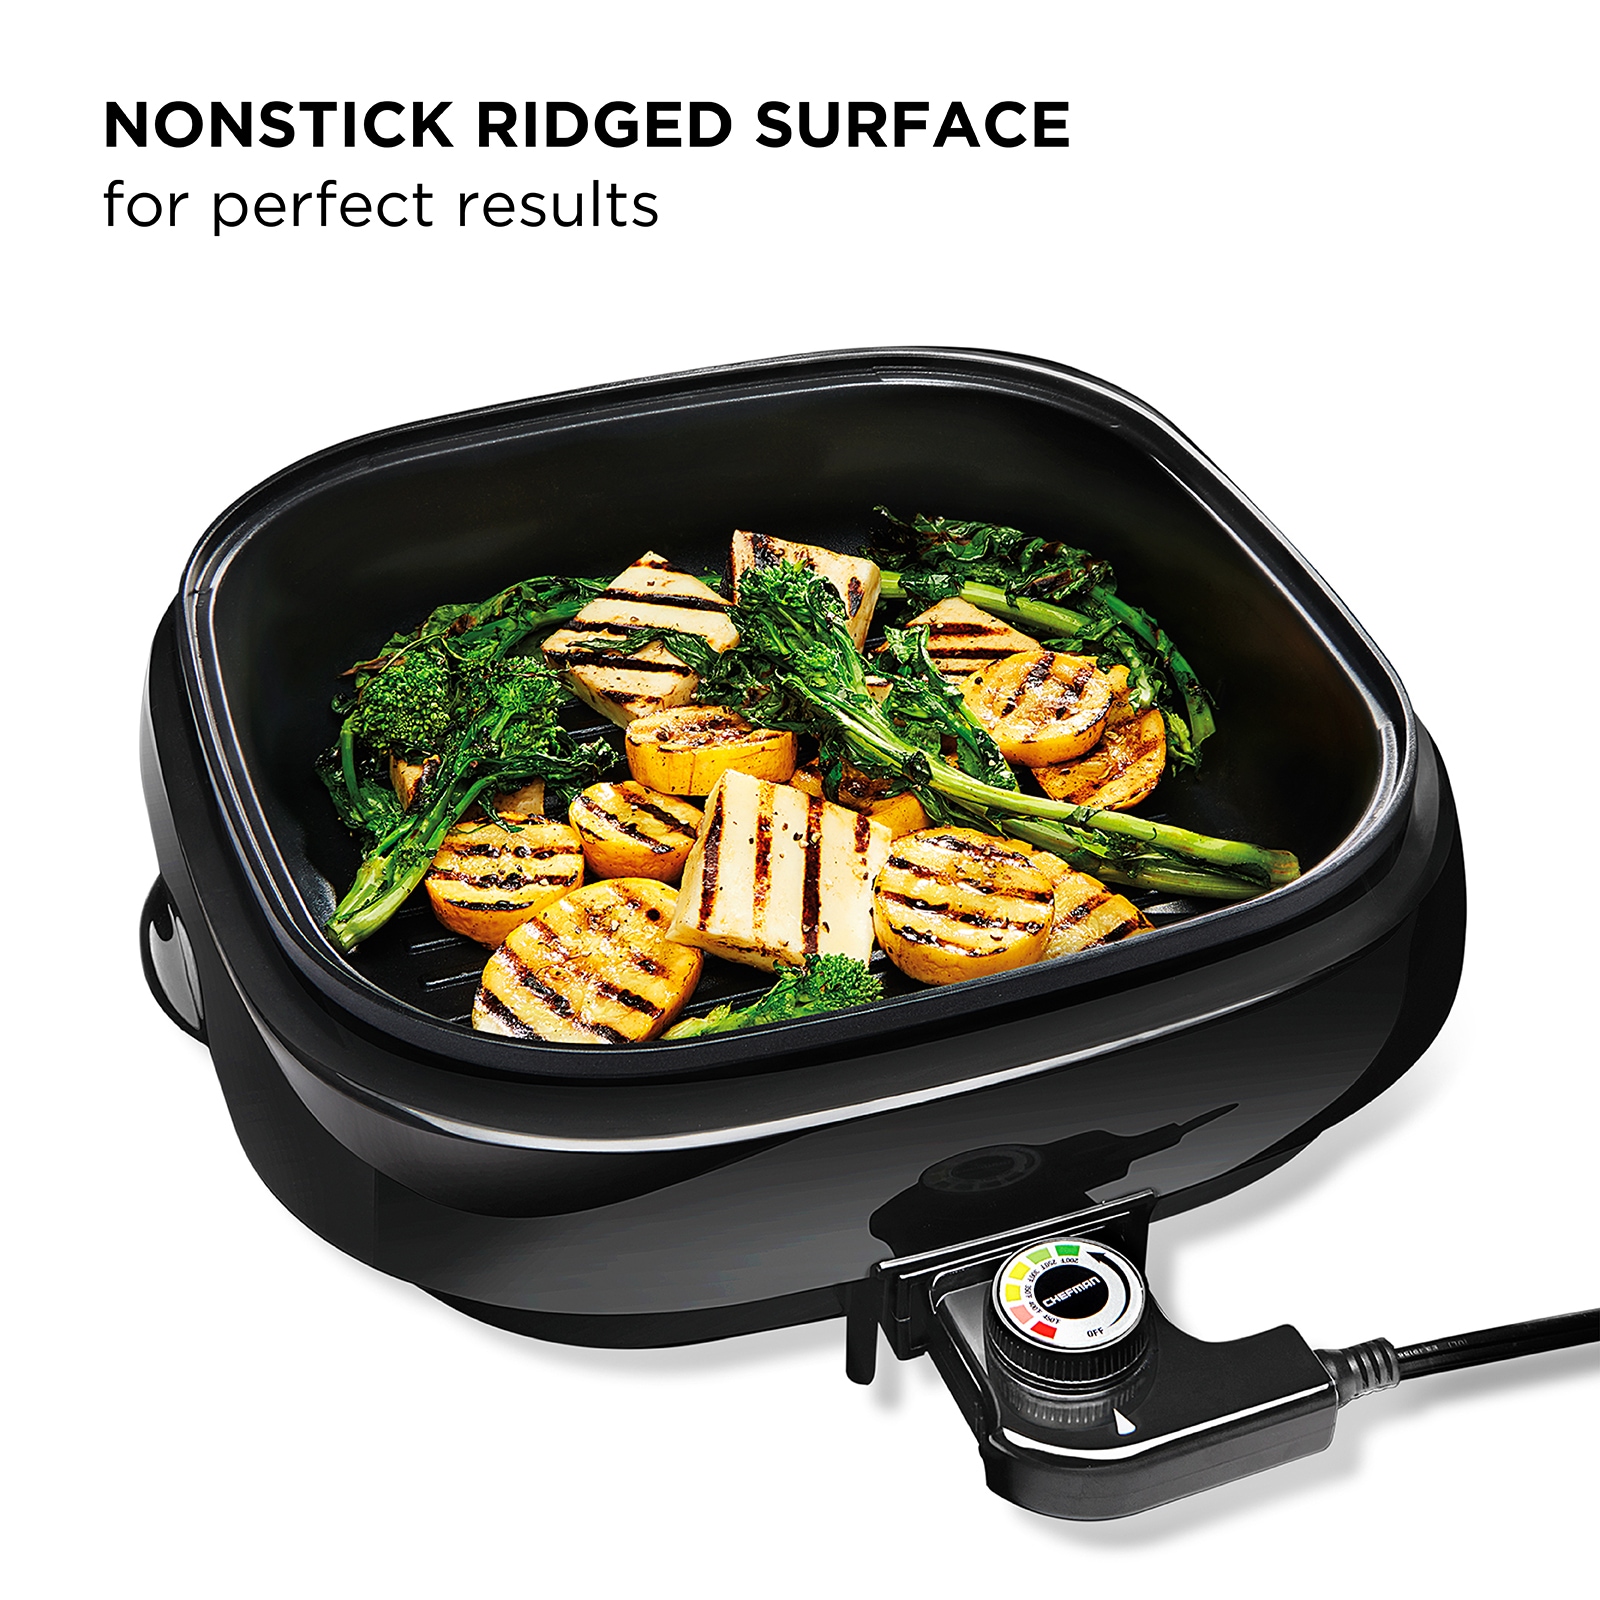 Brentwood Appliances 16 sq. in. Black Nonstick Electric Skillet